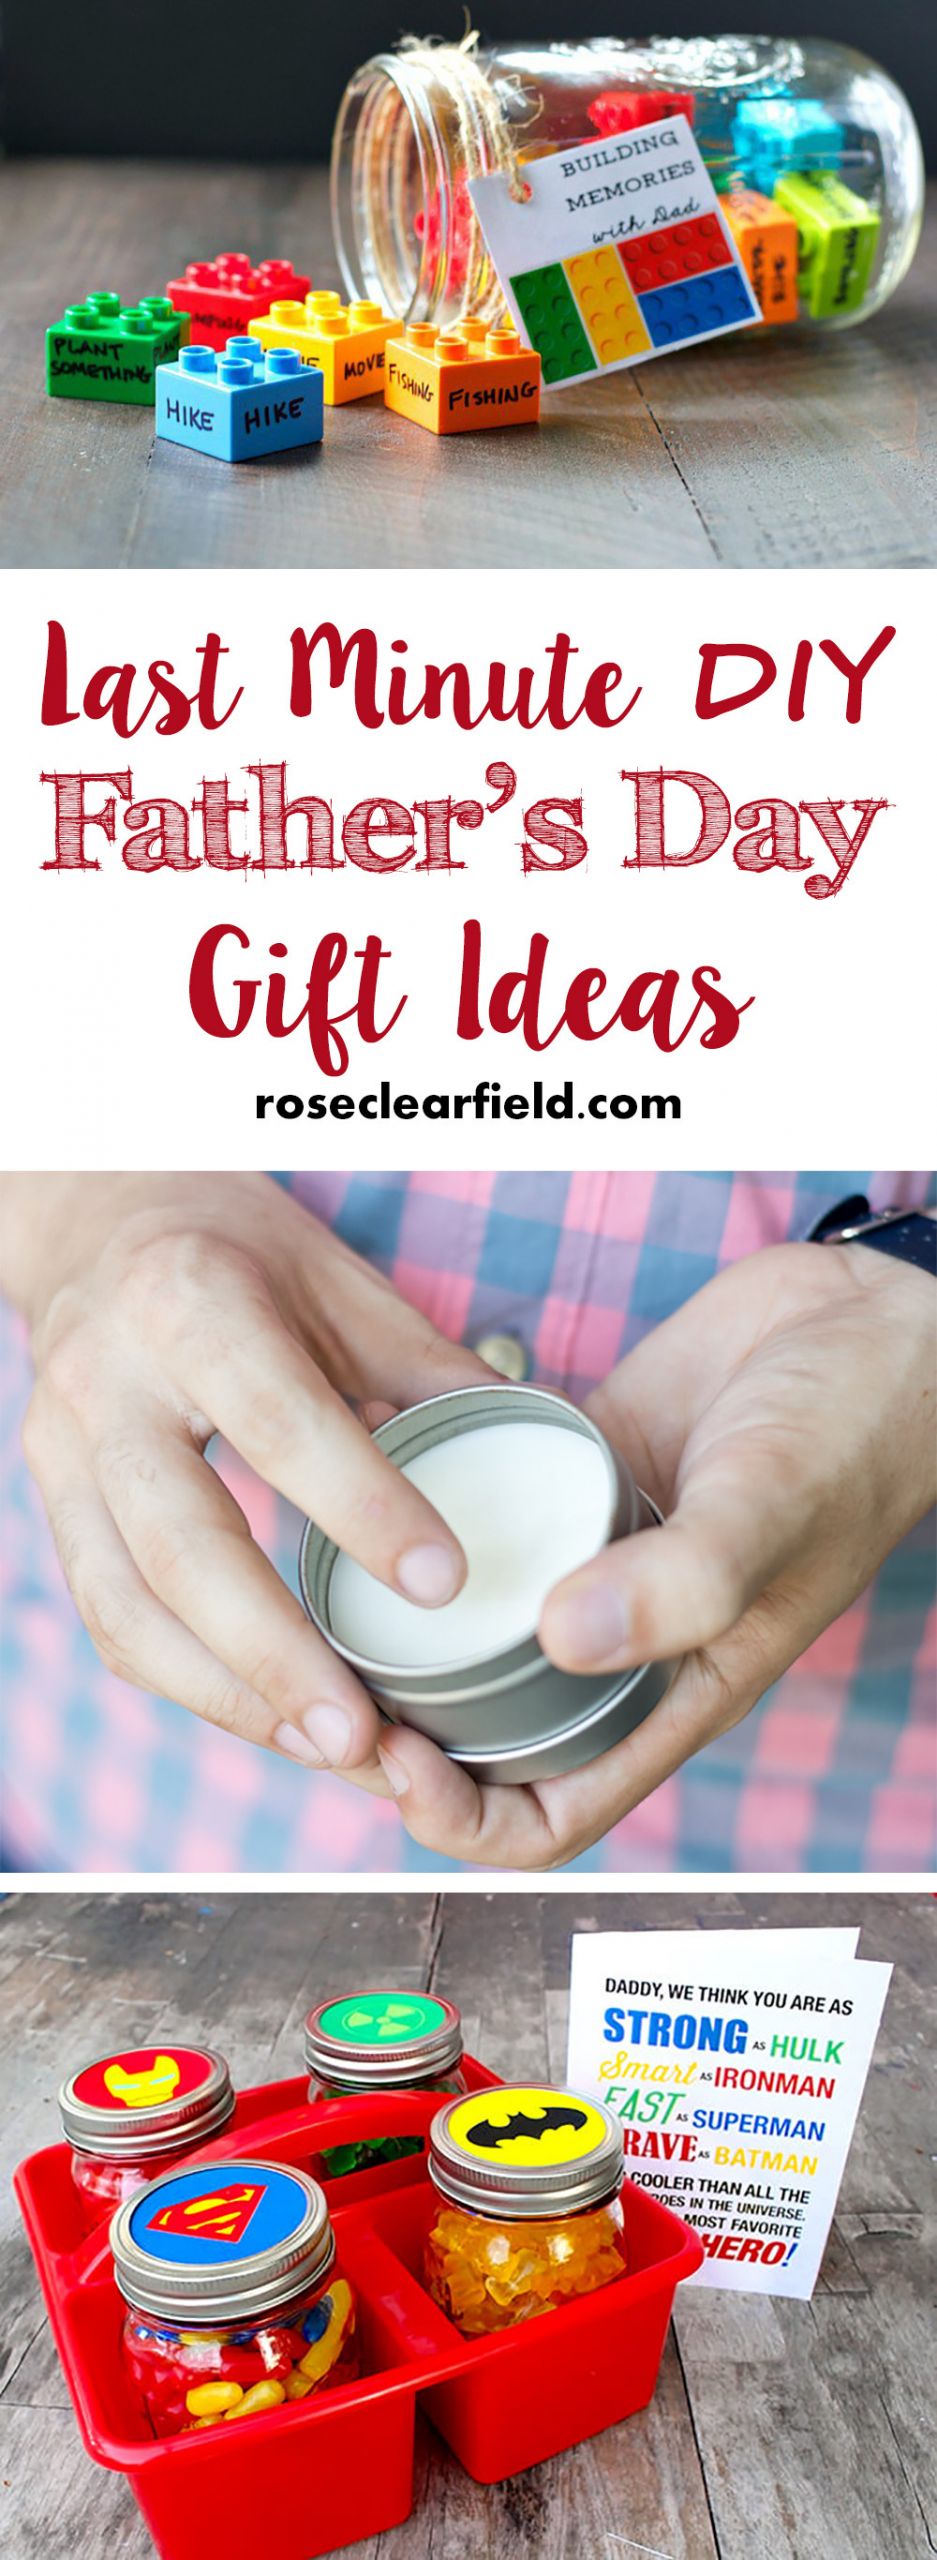 Last Minute DIY Mother'S Day Gifts
 Last Minute DIY Father s Day Gift Ideas • Rose Clearfield